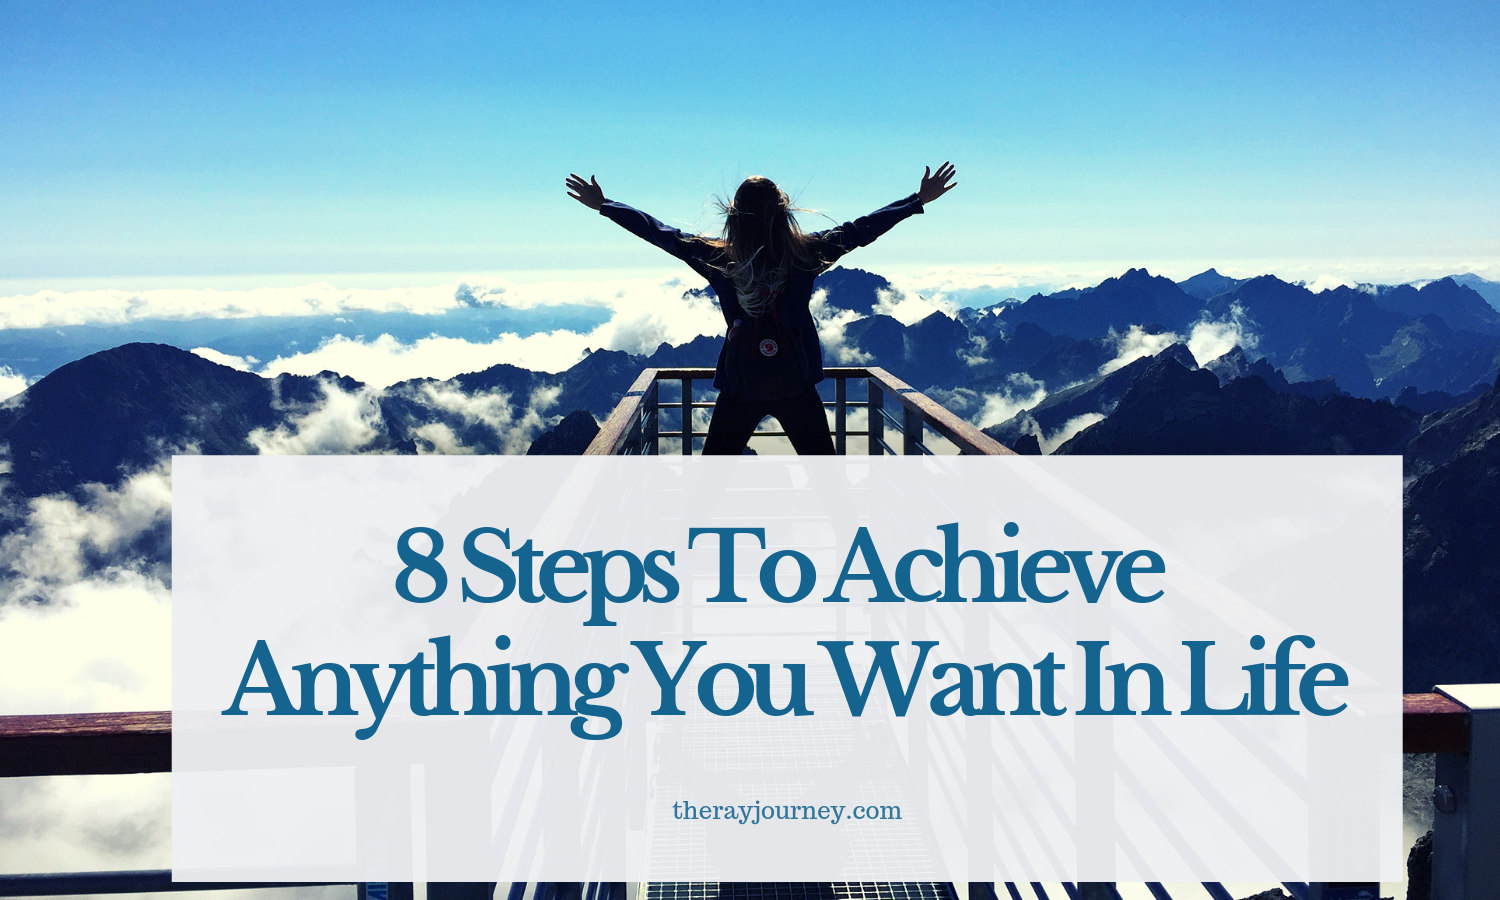 8 Steps To Achieve Anything You Want In Life